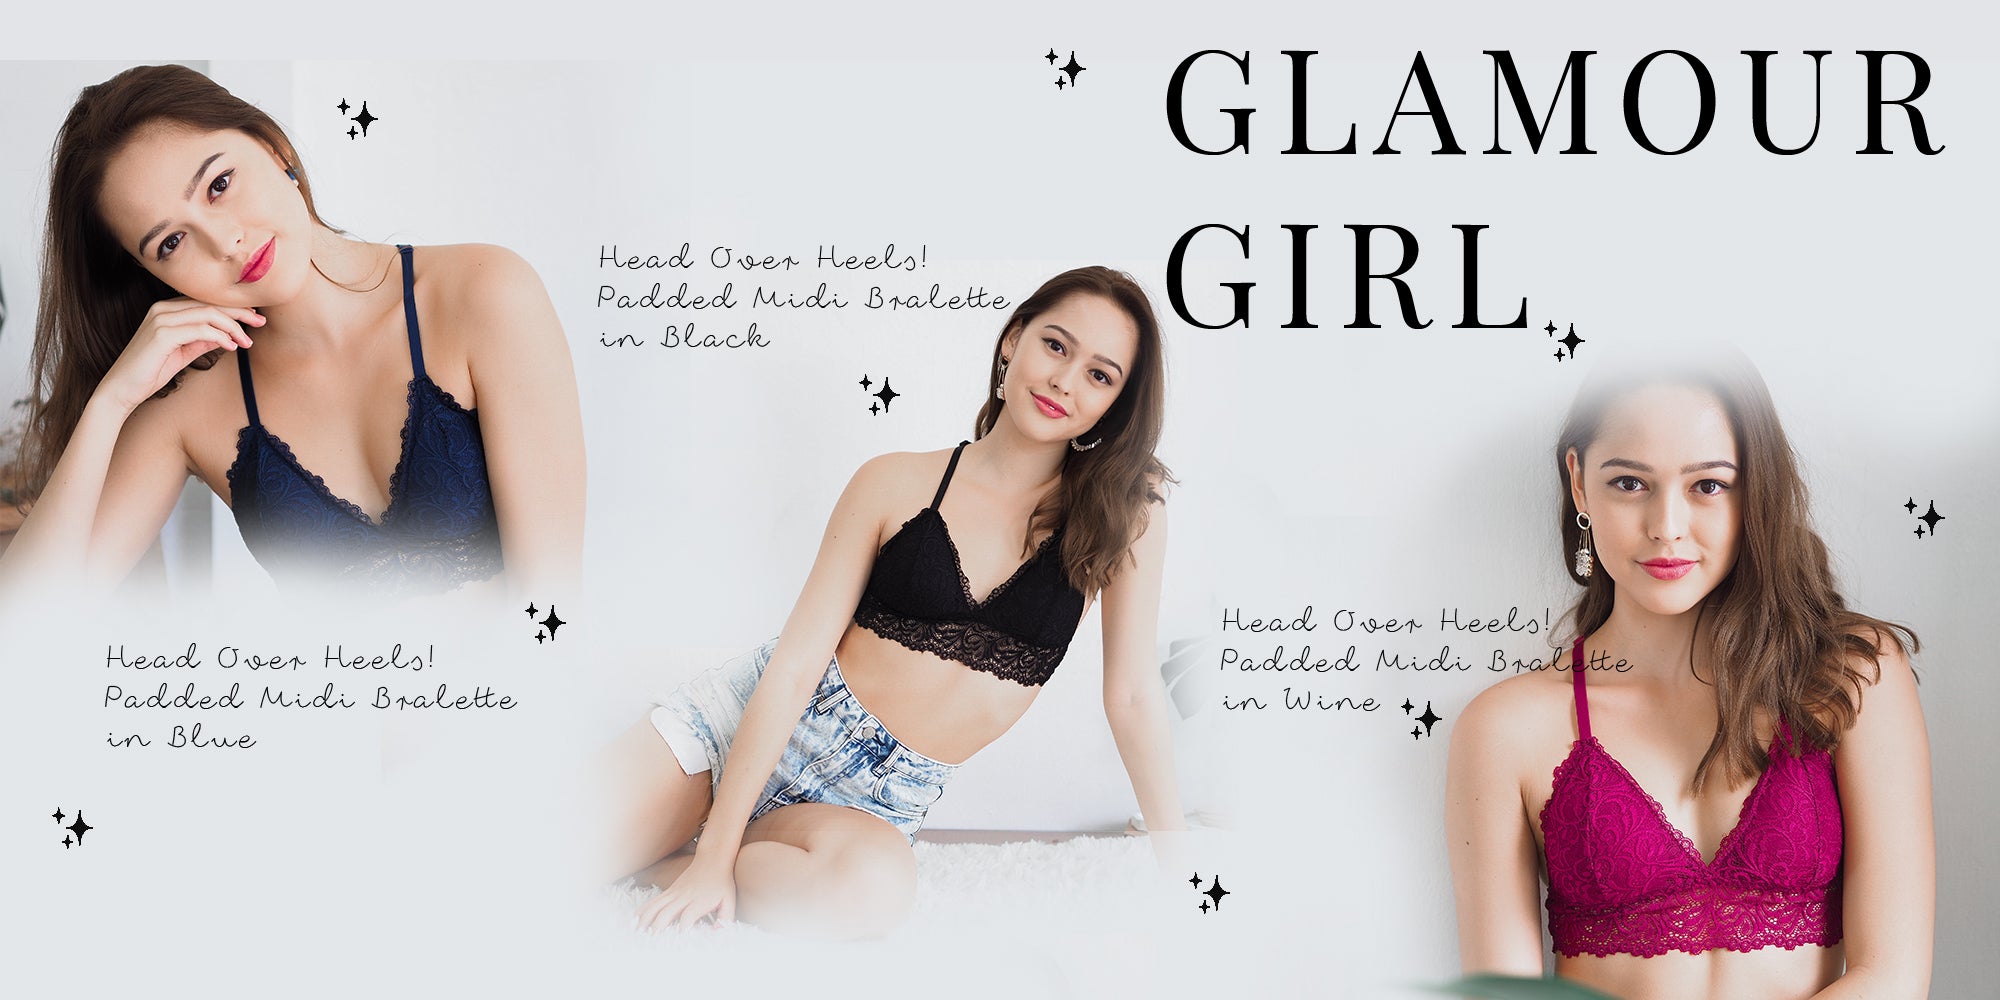 Glamour Girl! Collection Tagged 34D/75D